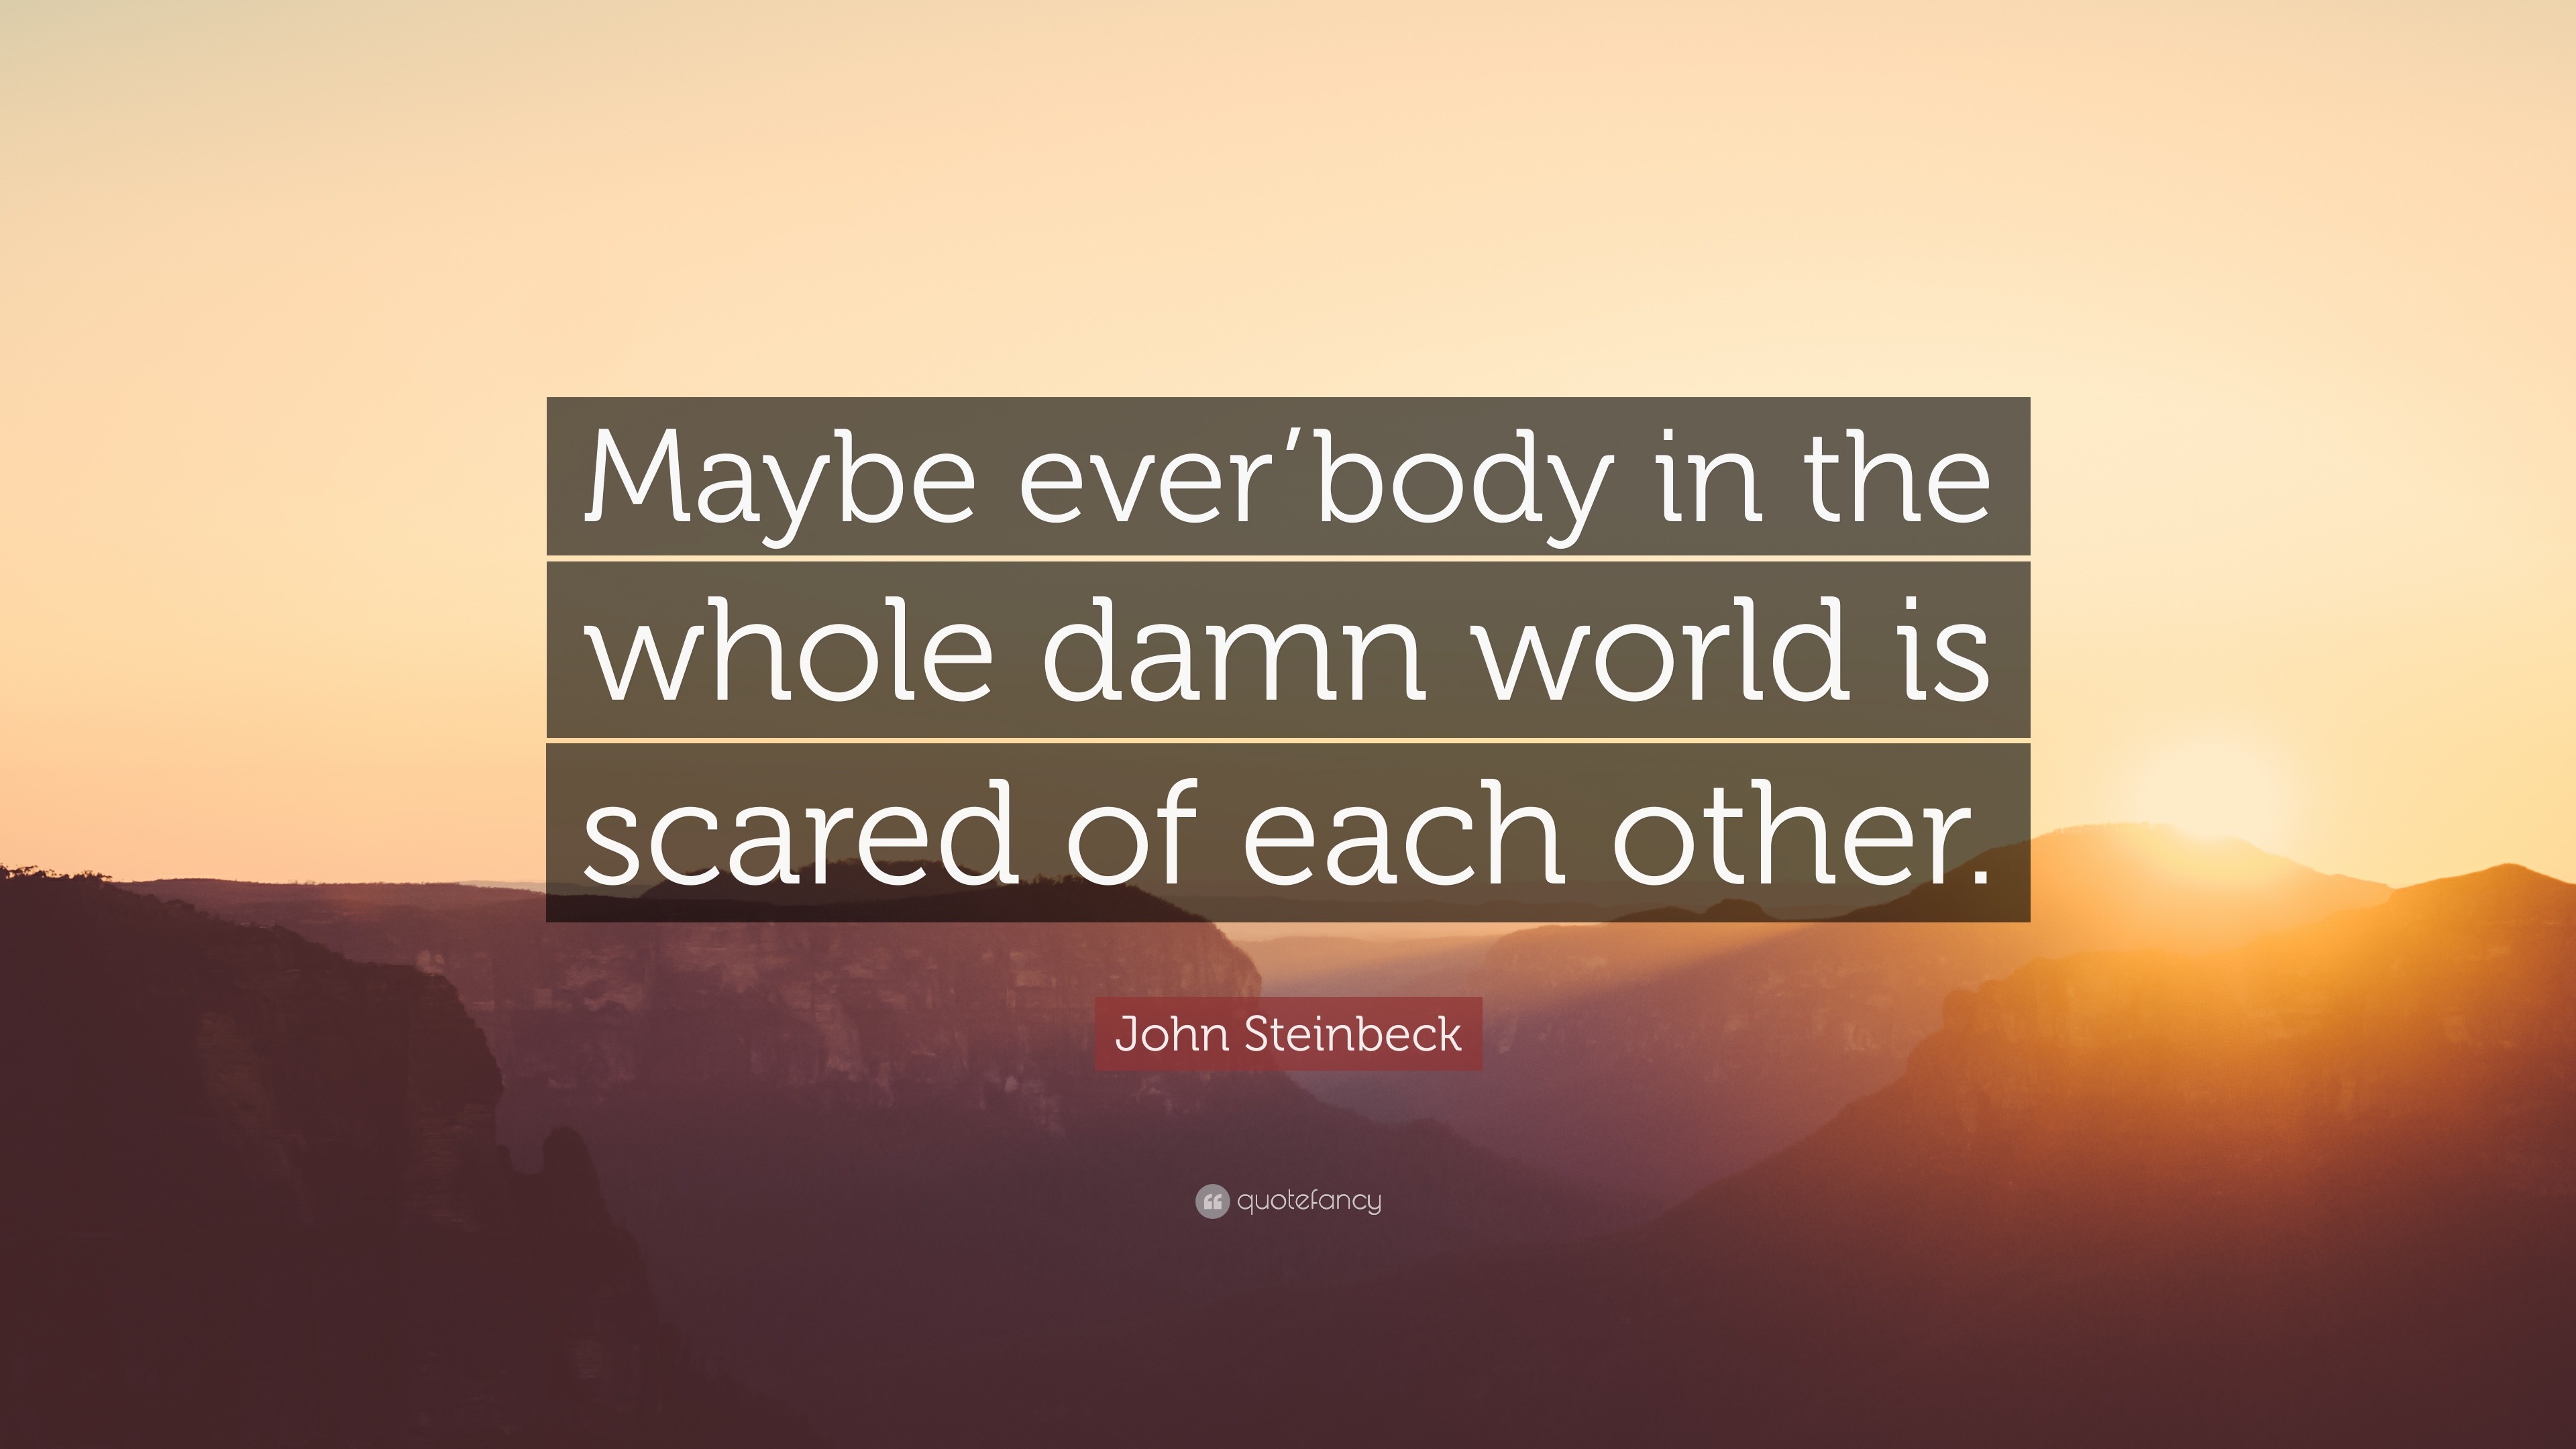 Loneliness Quotes “Maybe ever body in the whole damn world is scared of